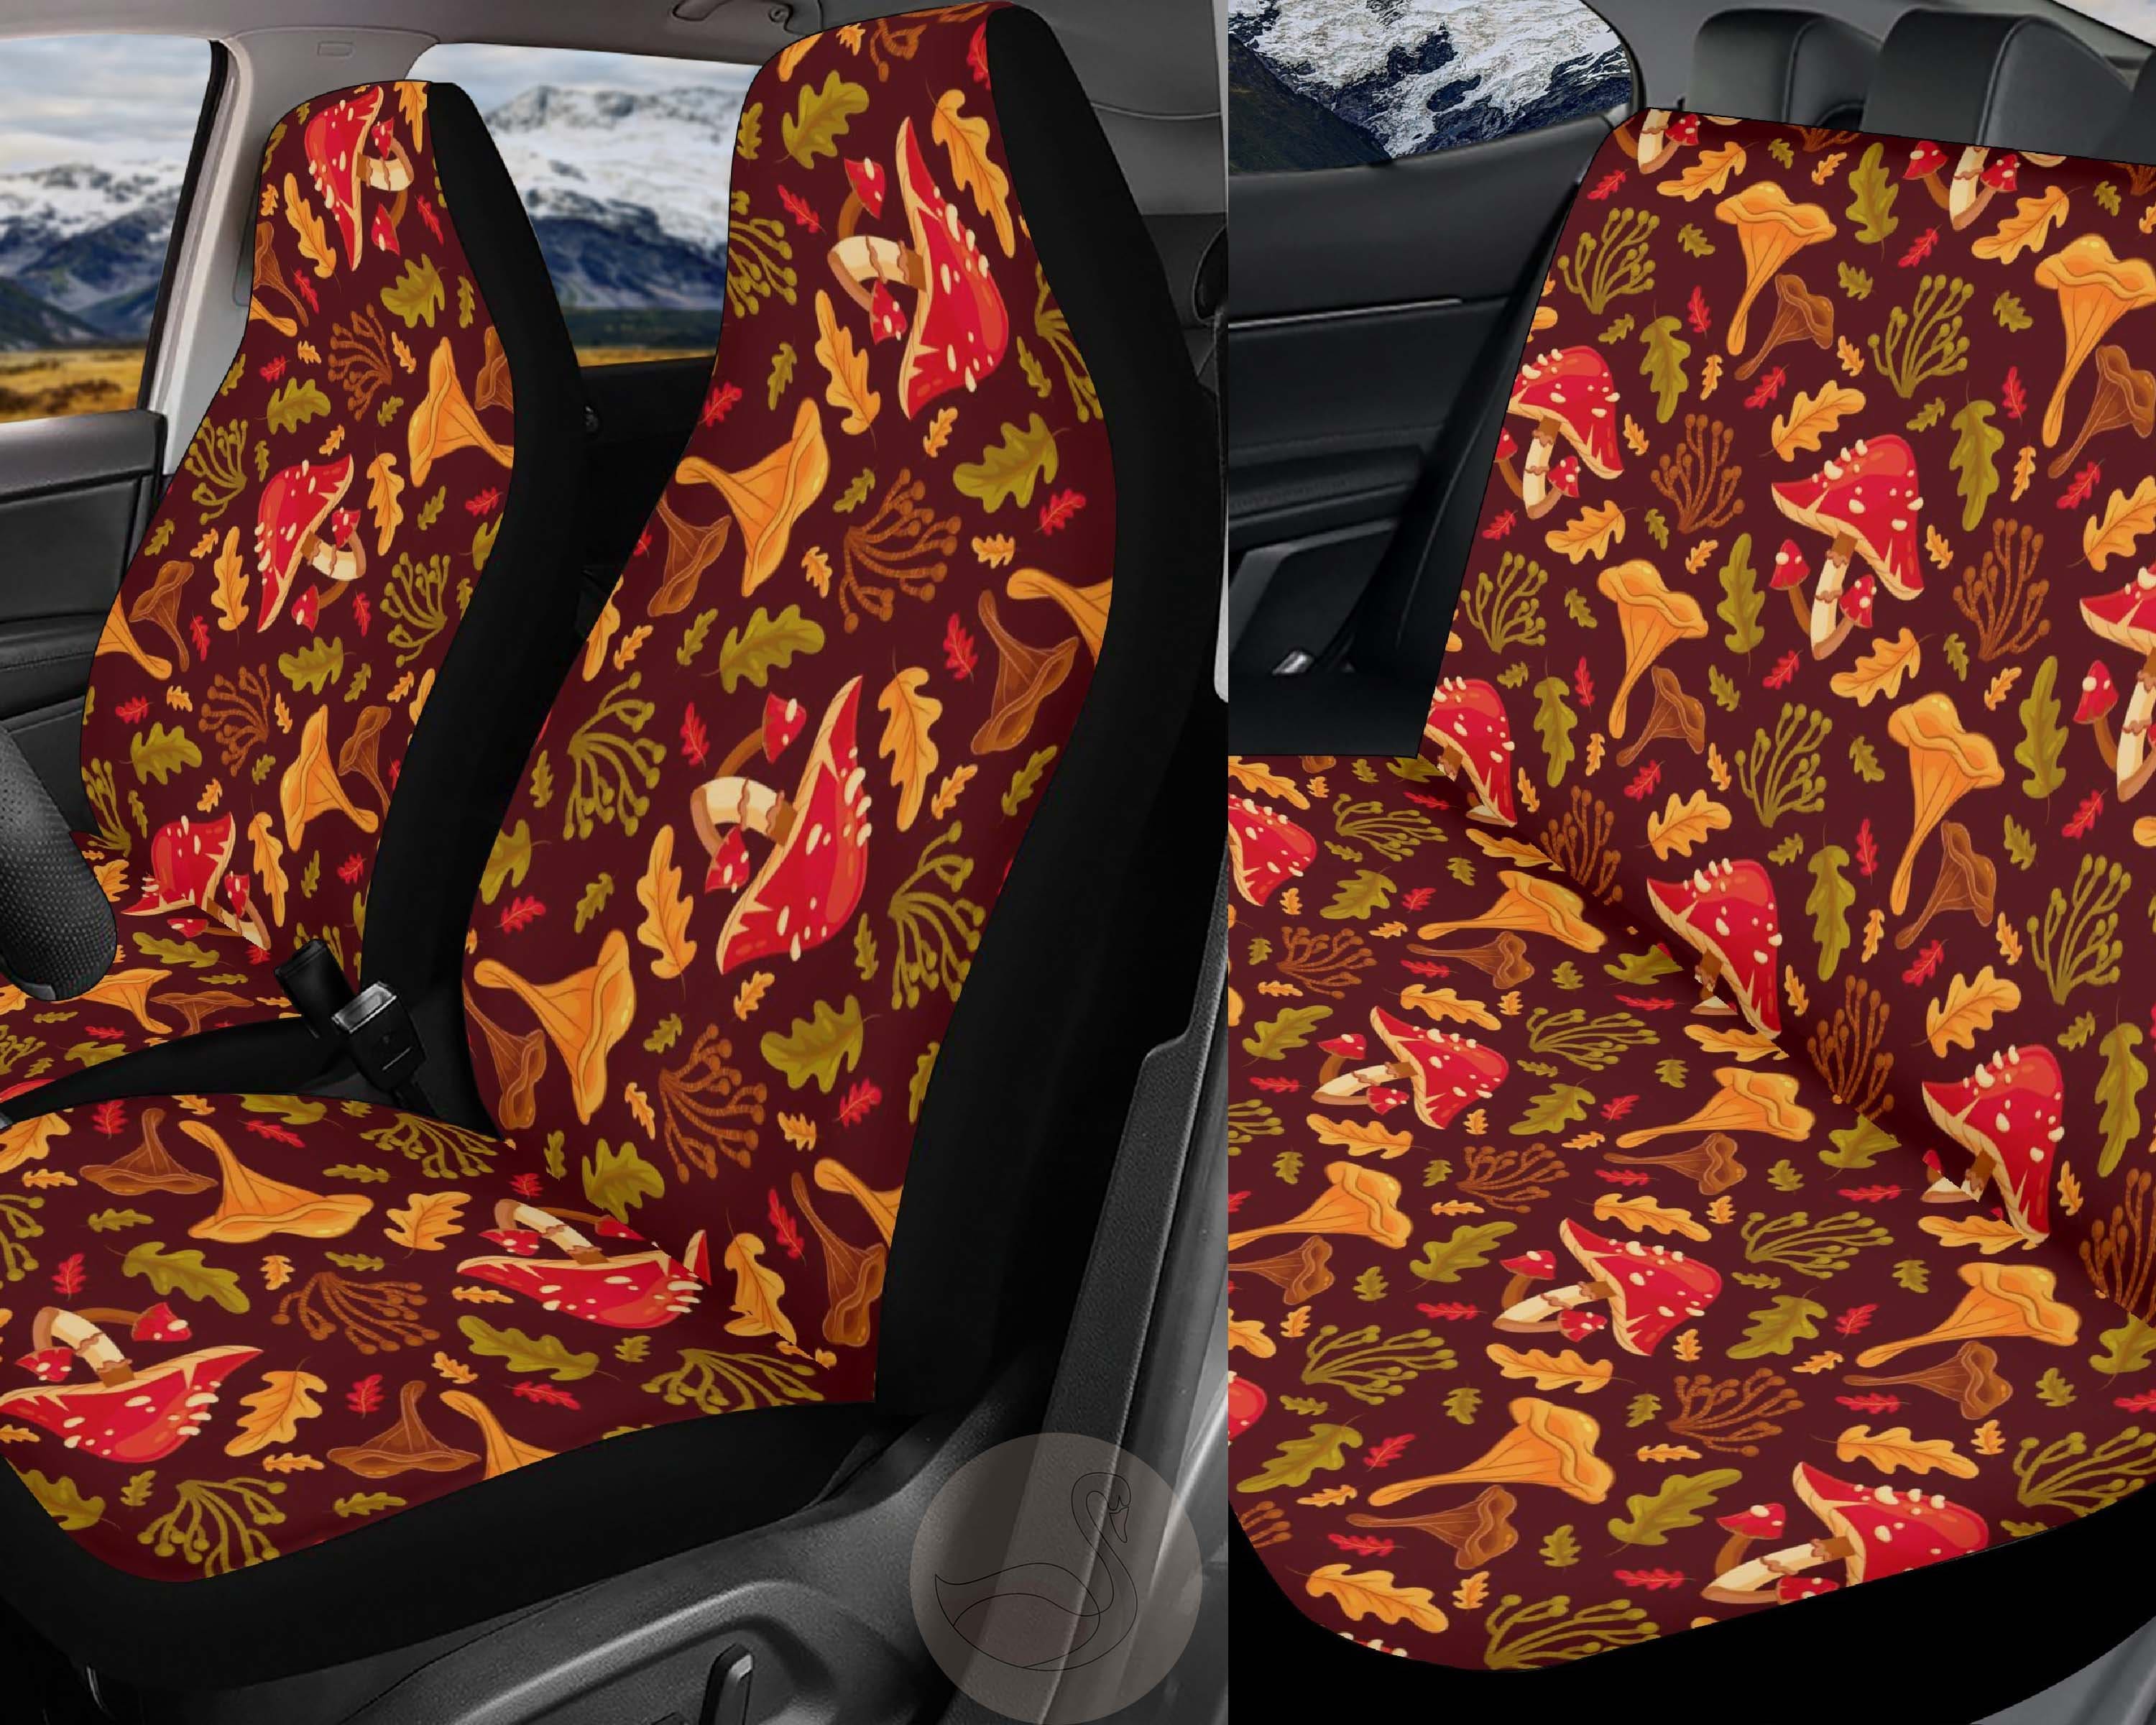 Retro Mid Mod Car Seat Covers, Orange, Flower Power, Mod Daisy, Hipster,  Groovy Car Accessories 